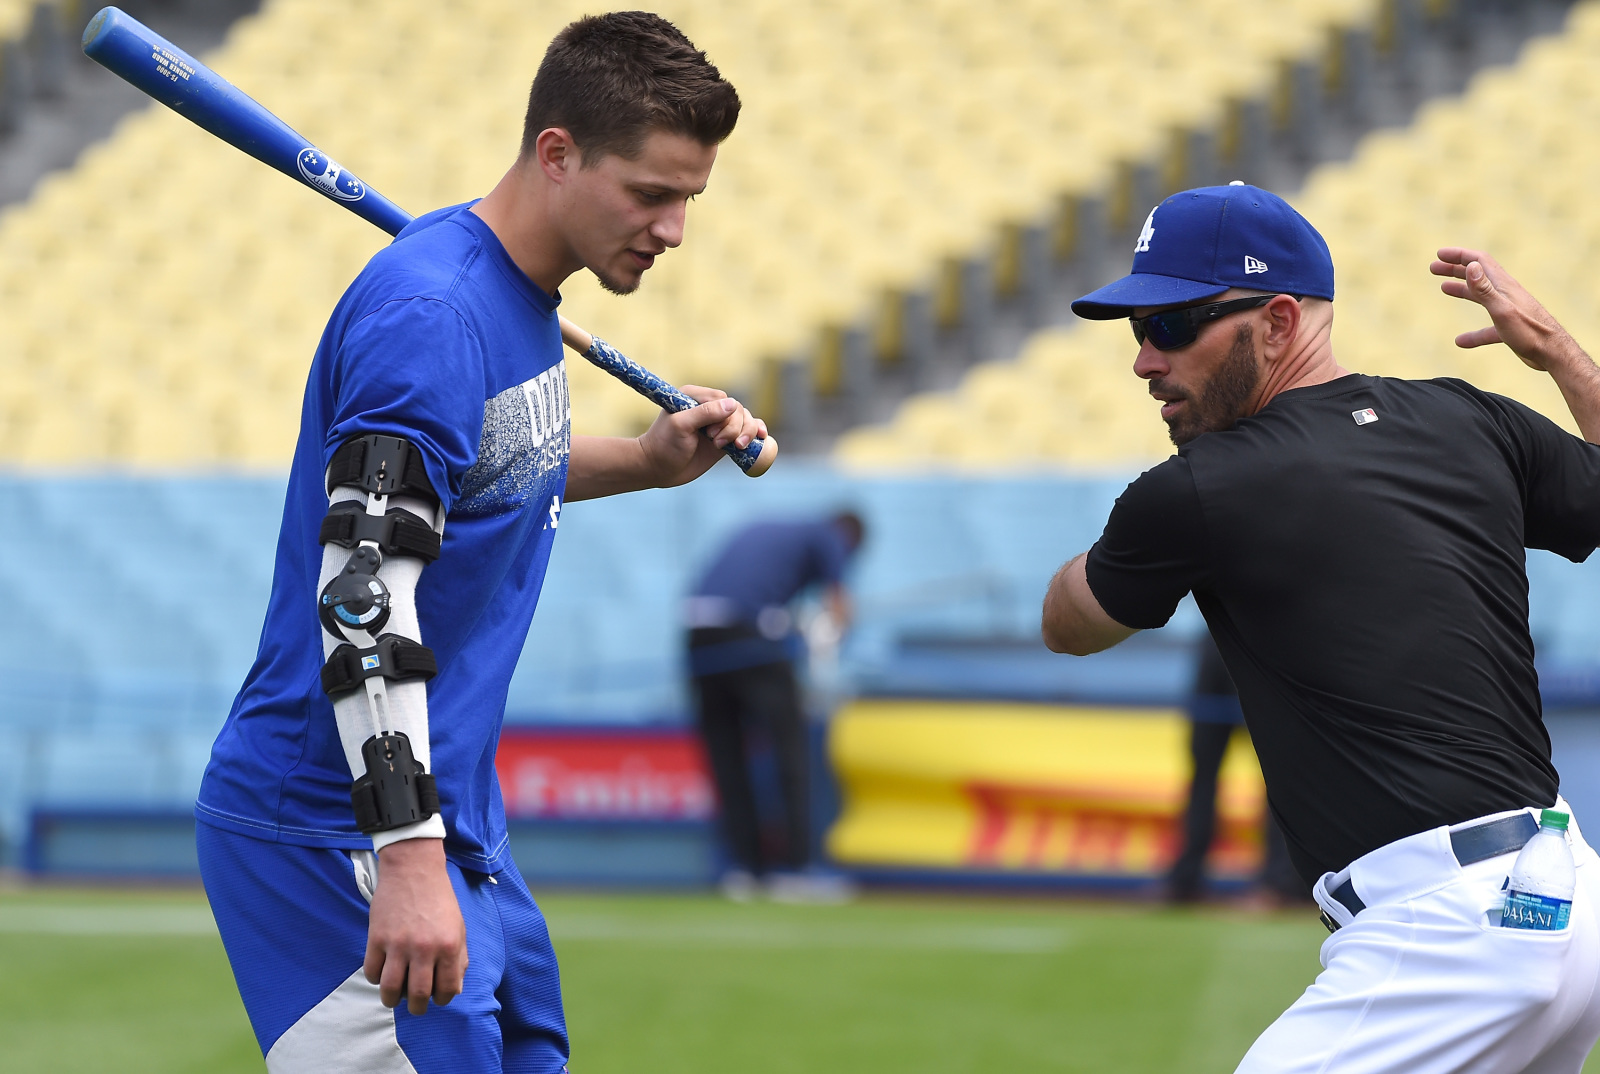 Pin on Corey Seager